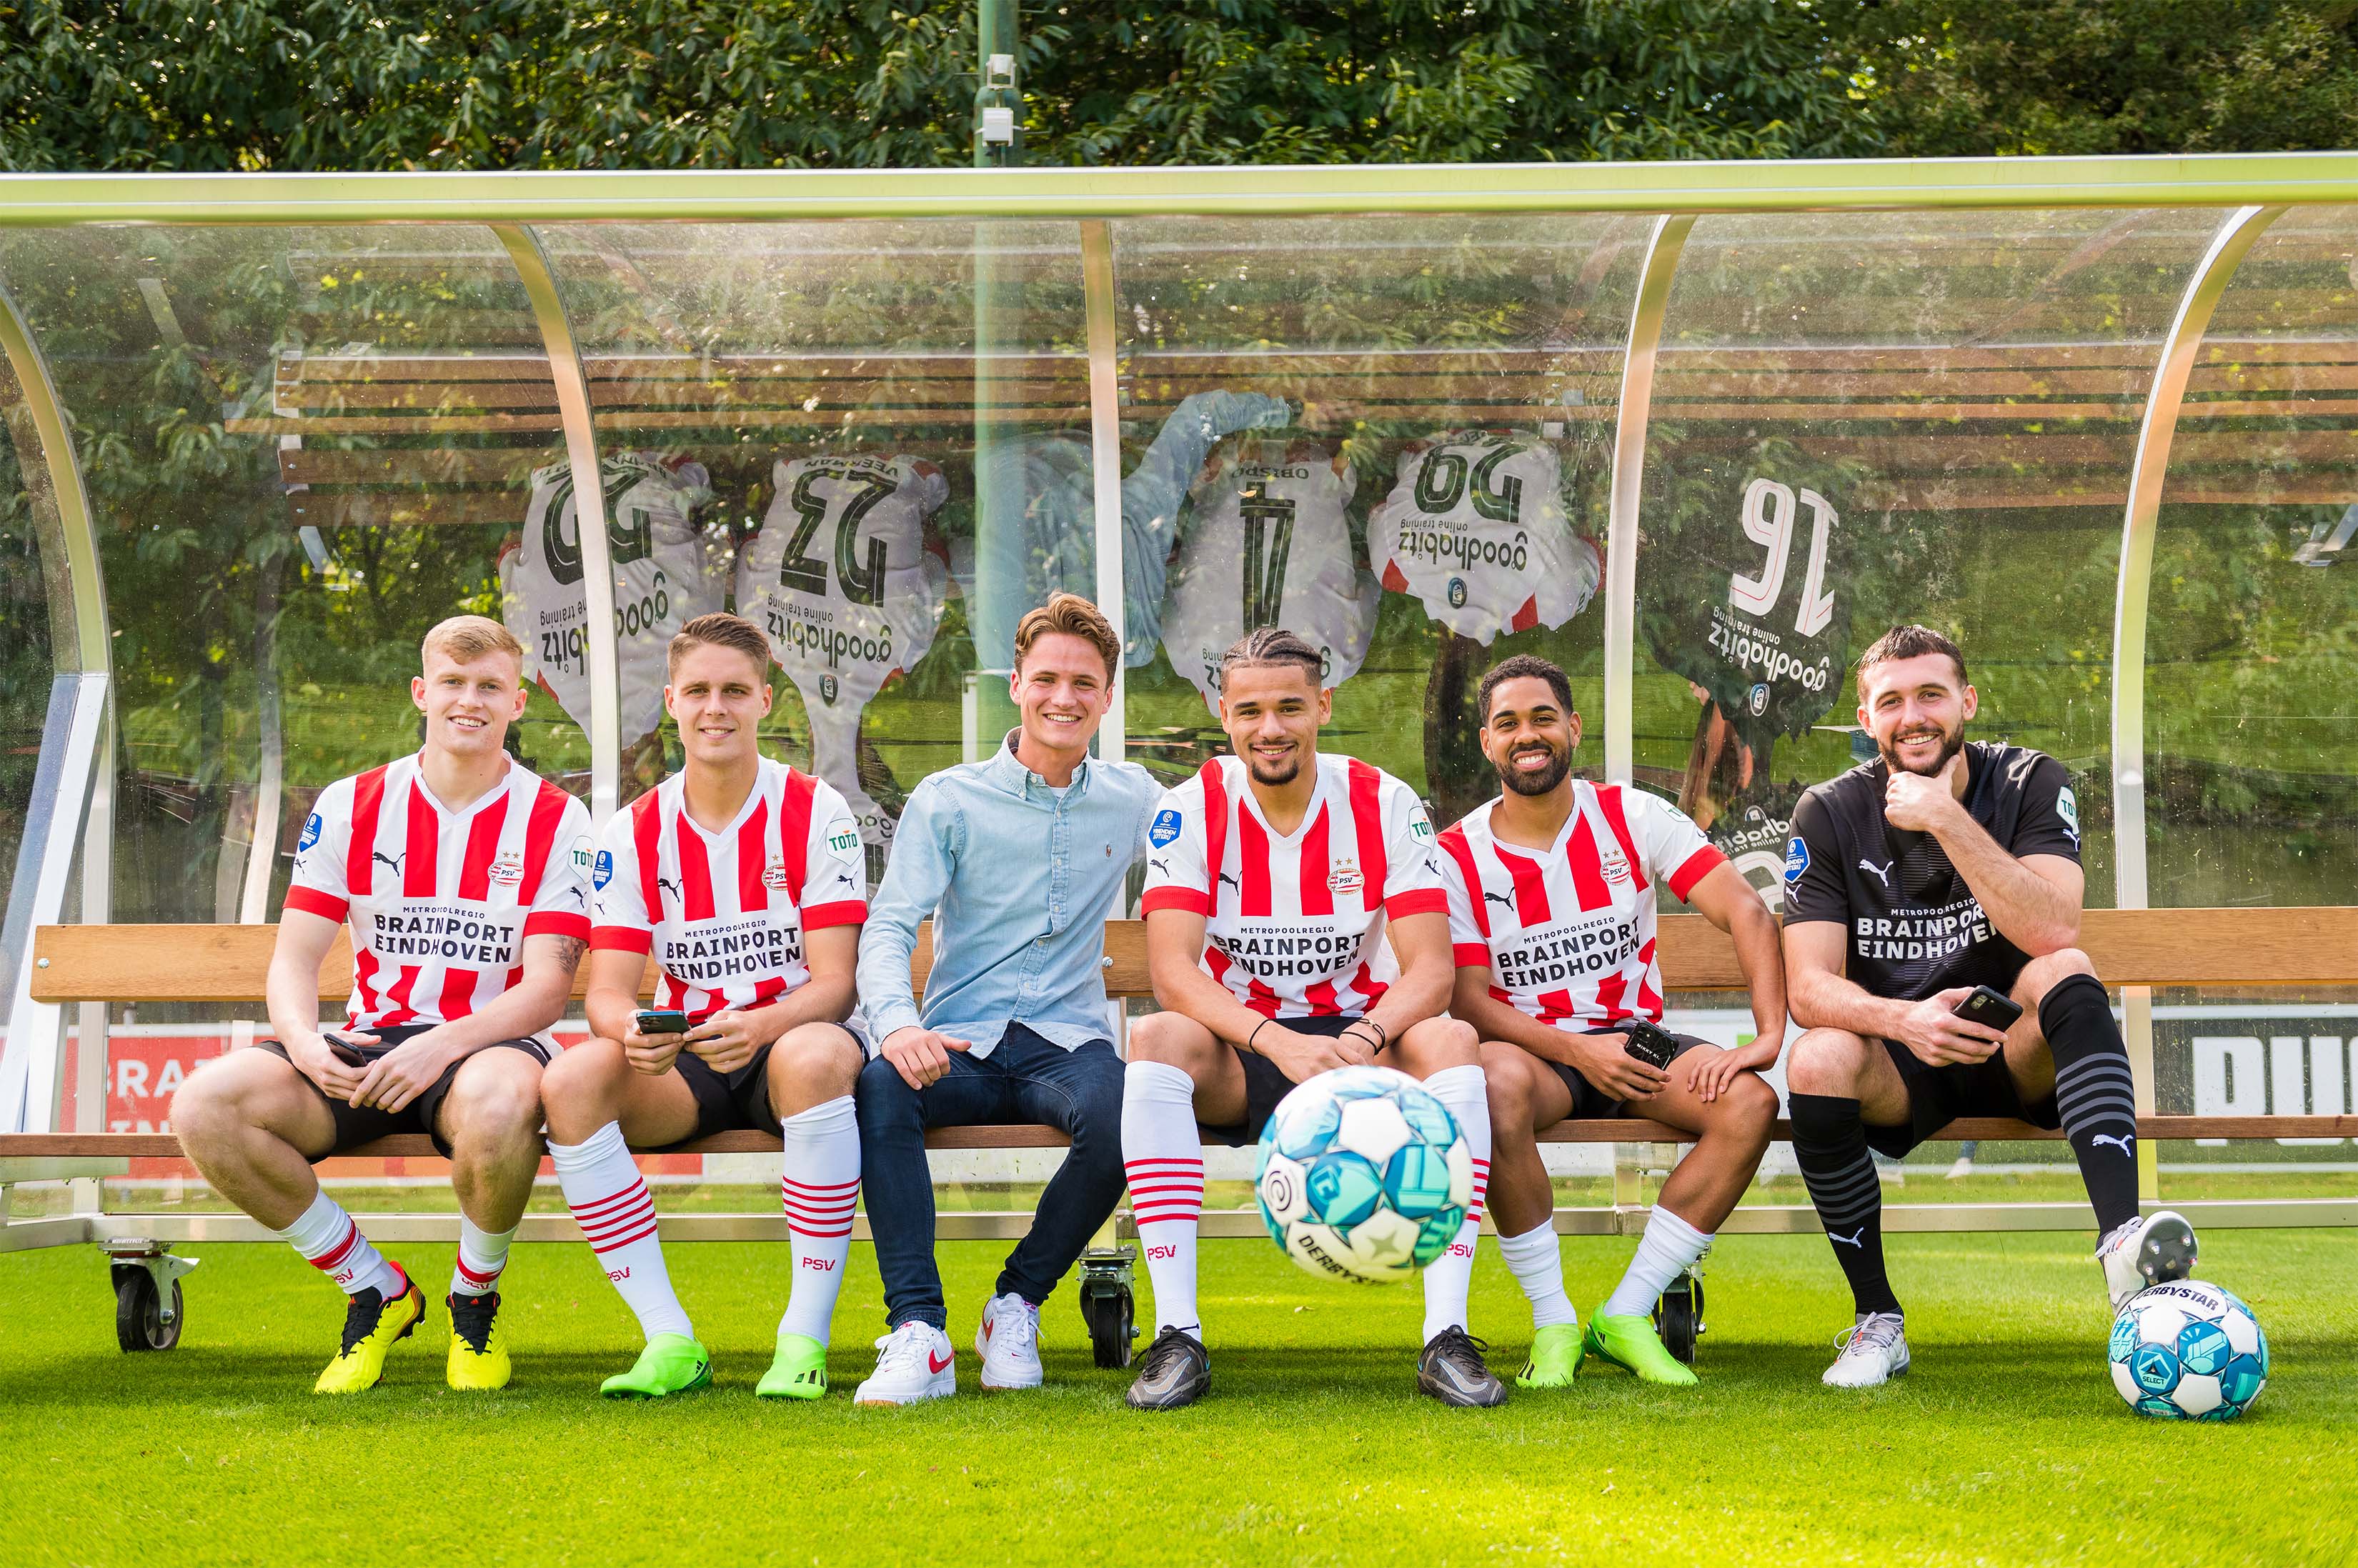 PSV players posing in the dug-out